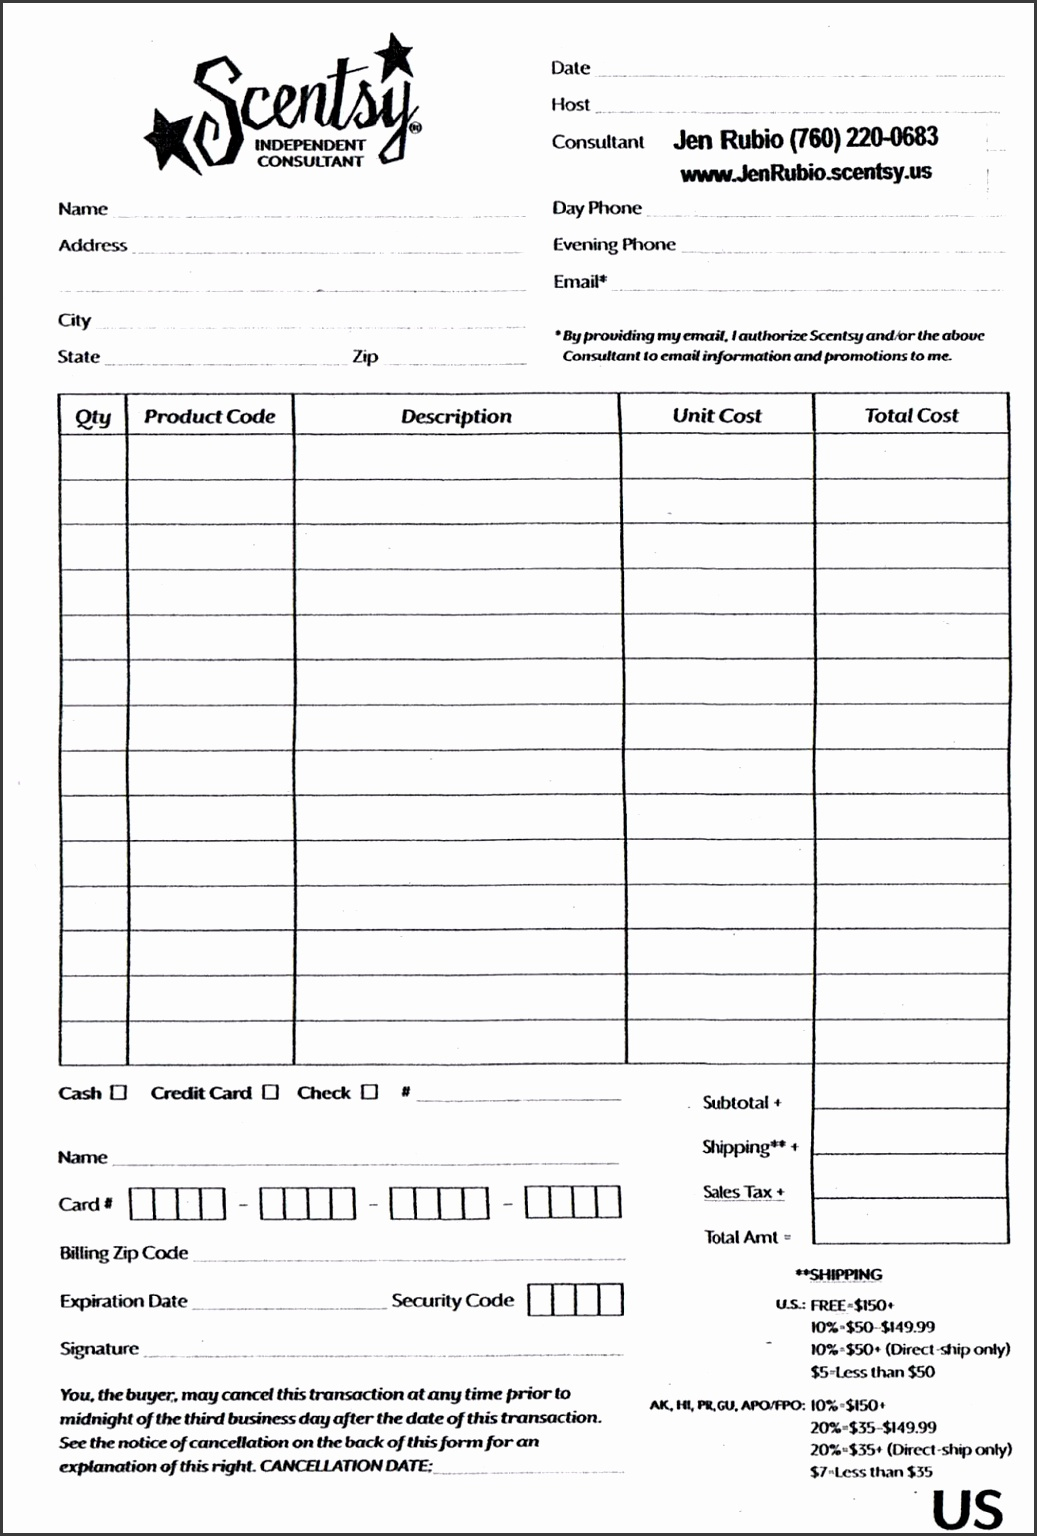 5 Blank Fundraiser Order Form Template - Sampletemplatess - Free Printable Scentsy Order Forms